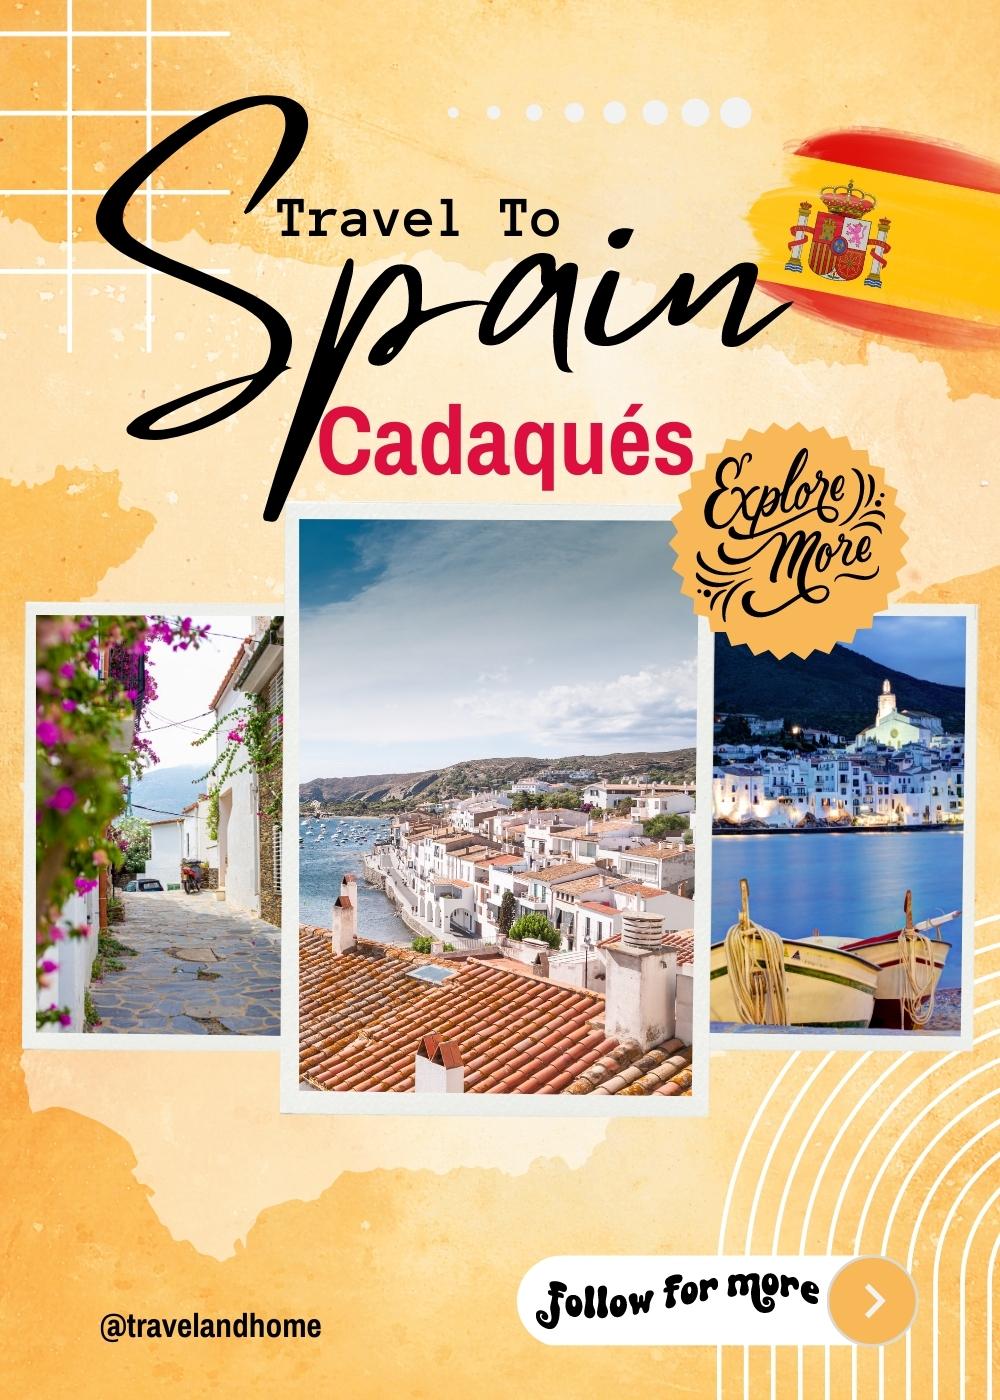 Cadaques travel and home prettiest seaside town in Spain @travelandhome